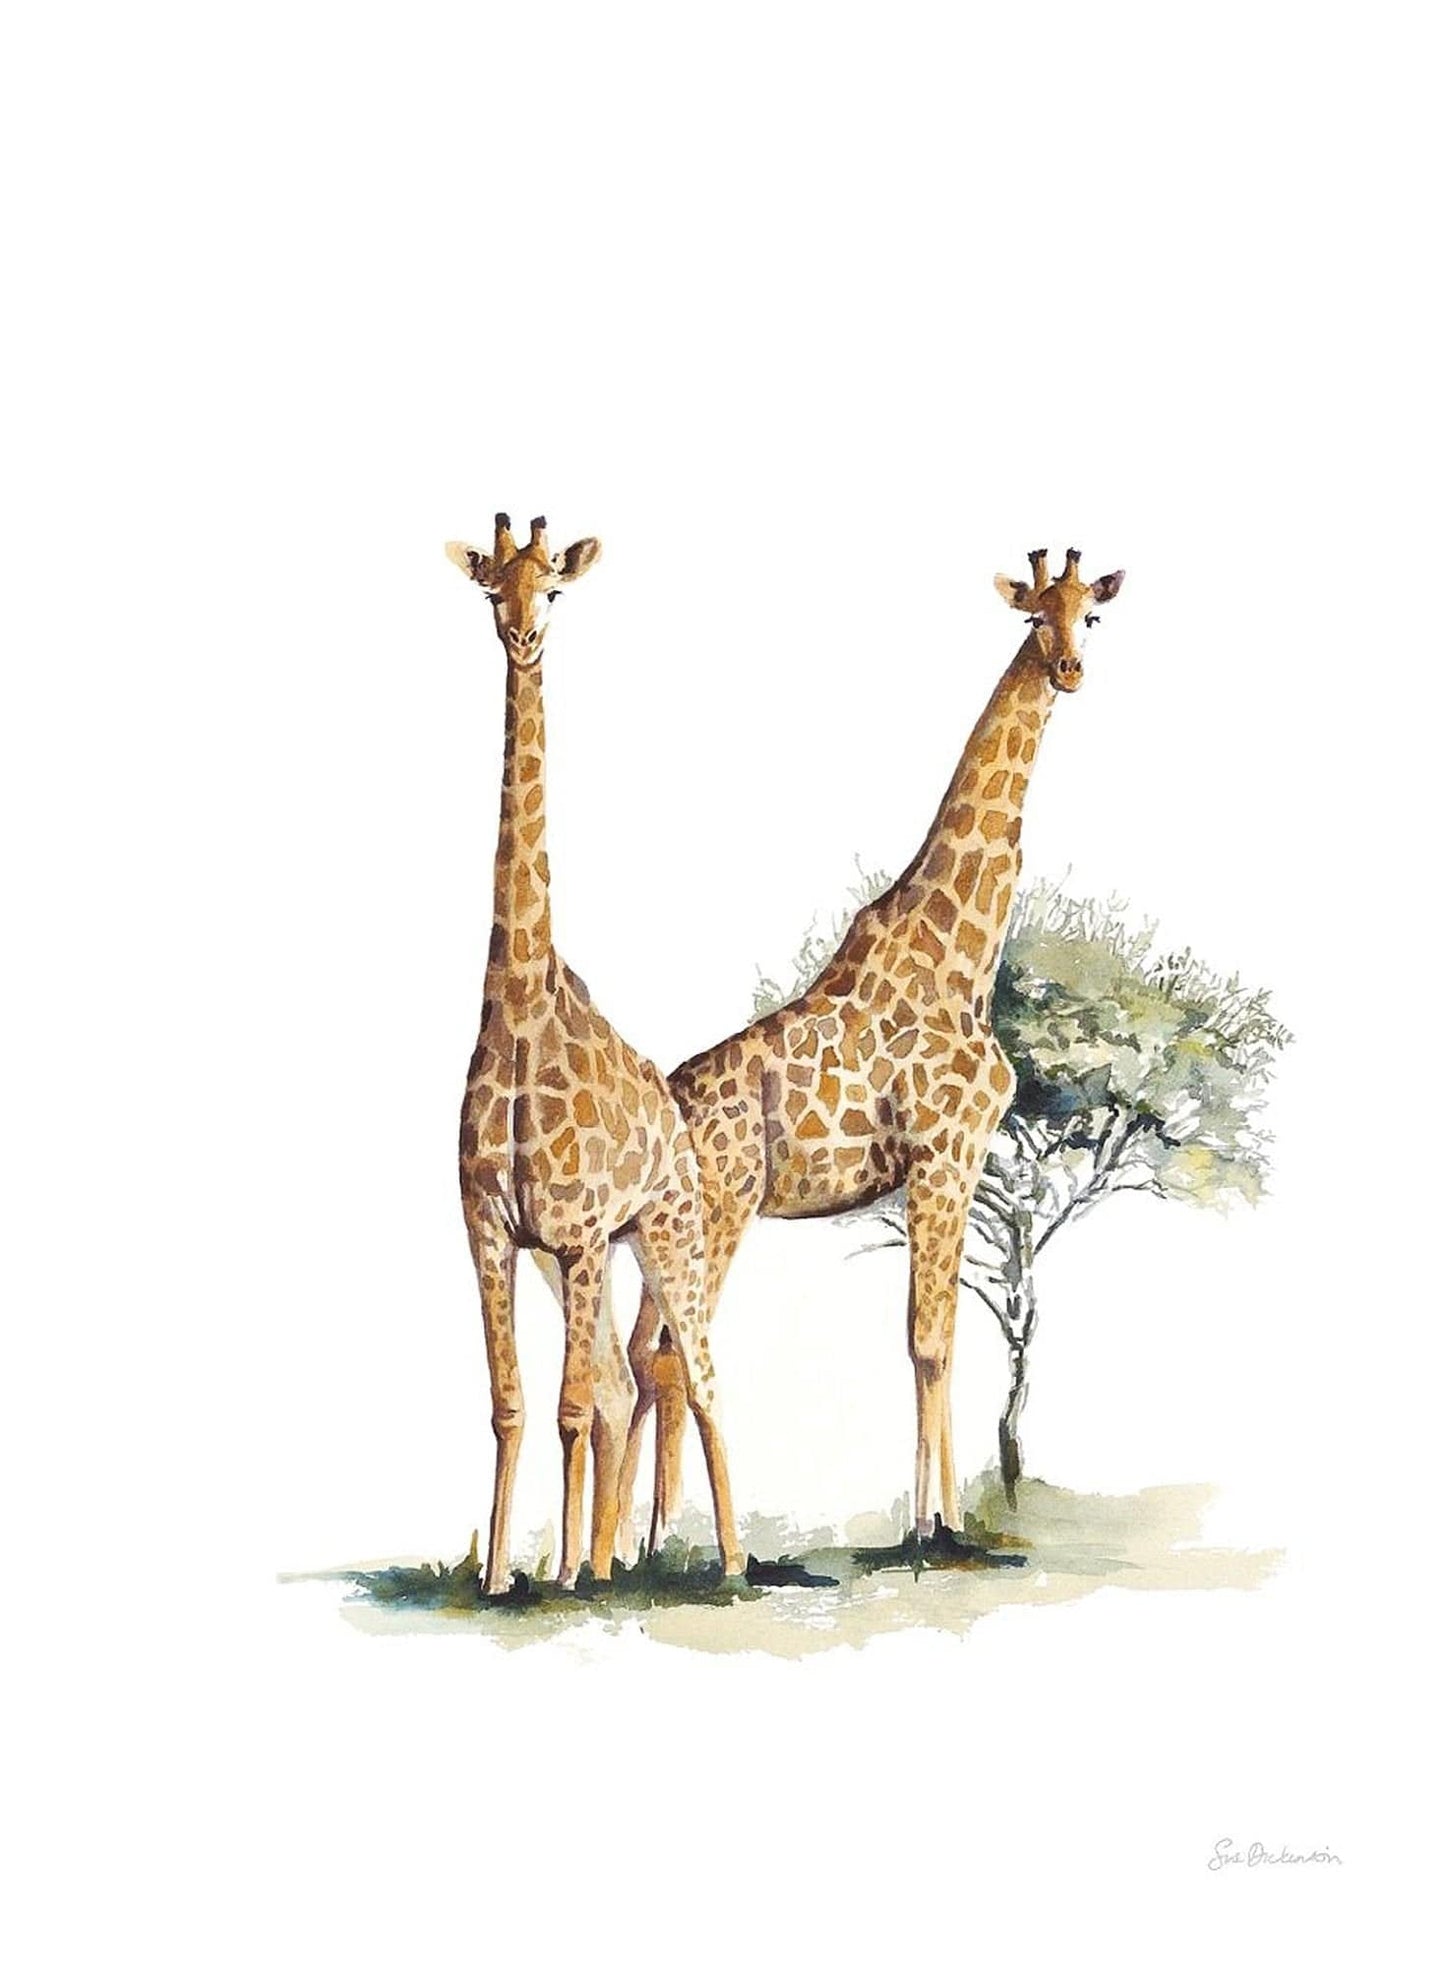 South African Limited Editions by Sue Dickinson - Giraffe Duo - Vertical - Fine Art Portfolio